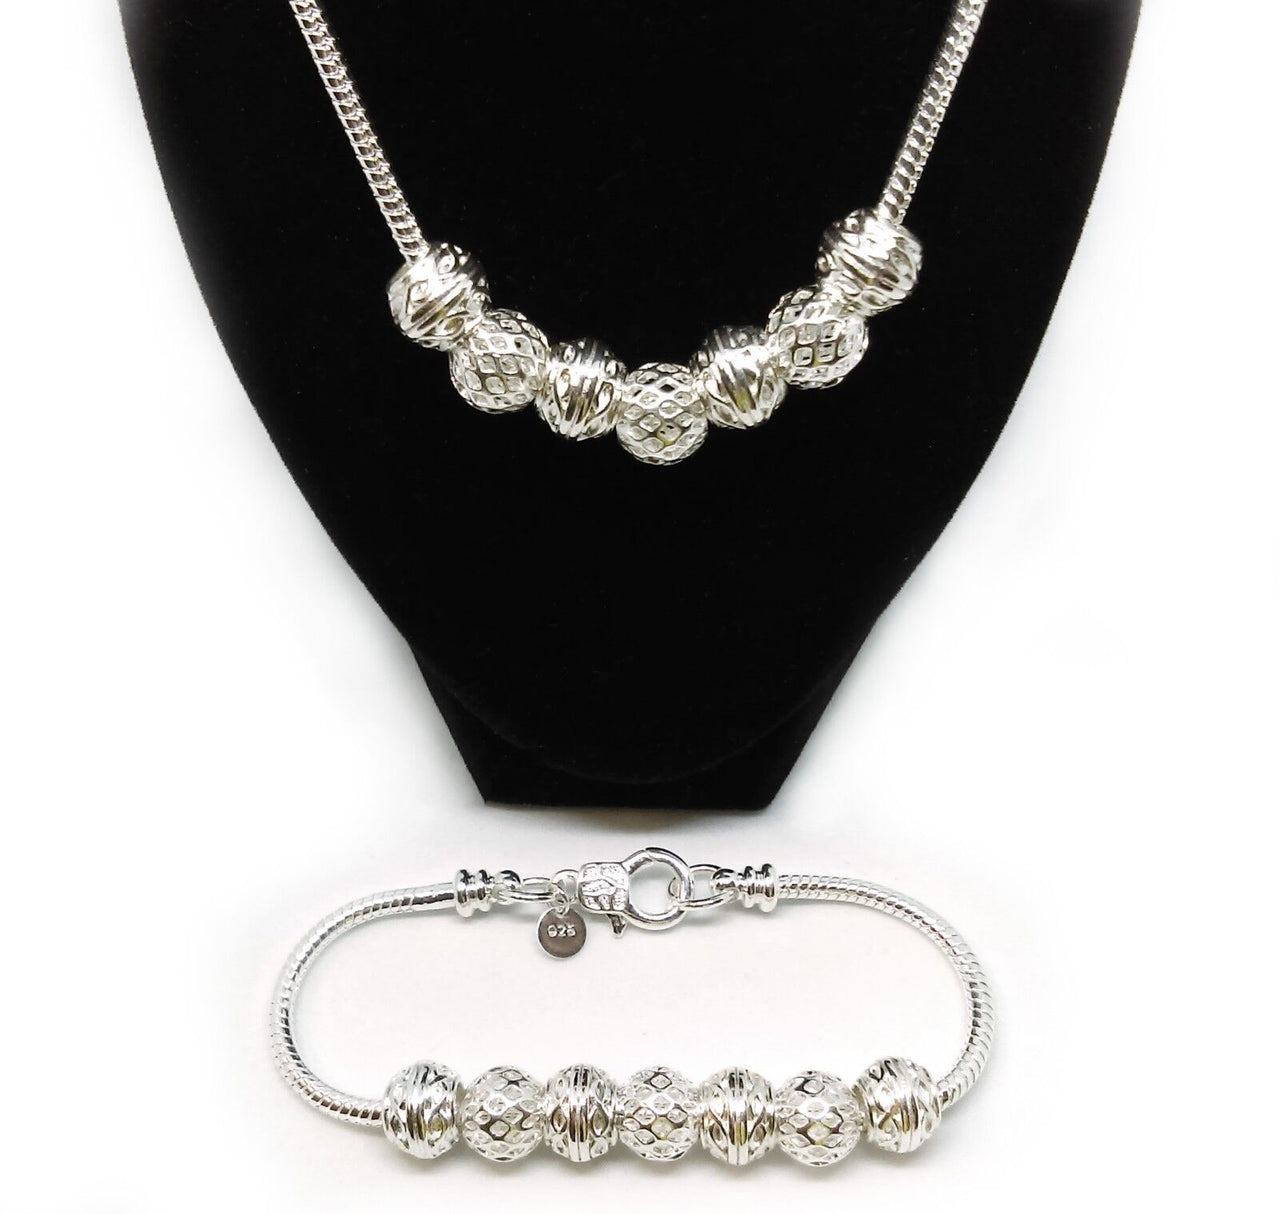 925 Sterling Silver Snake Chain 18" Necklace and Sterling Beads Bracelet Set